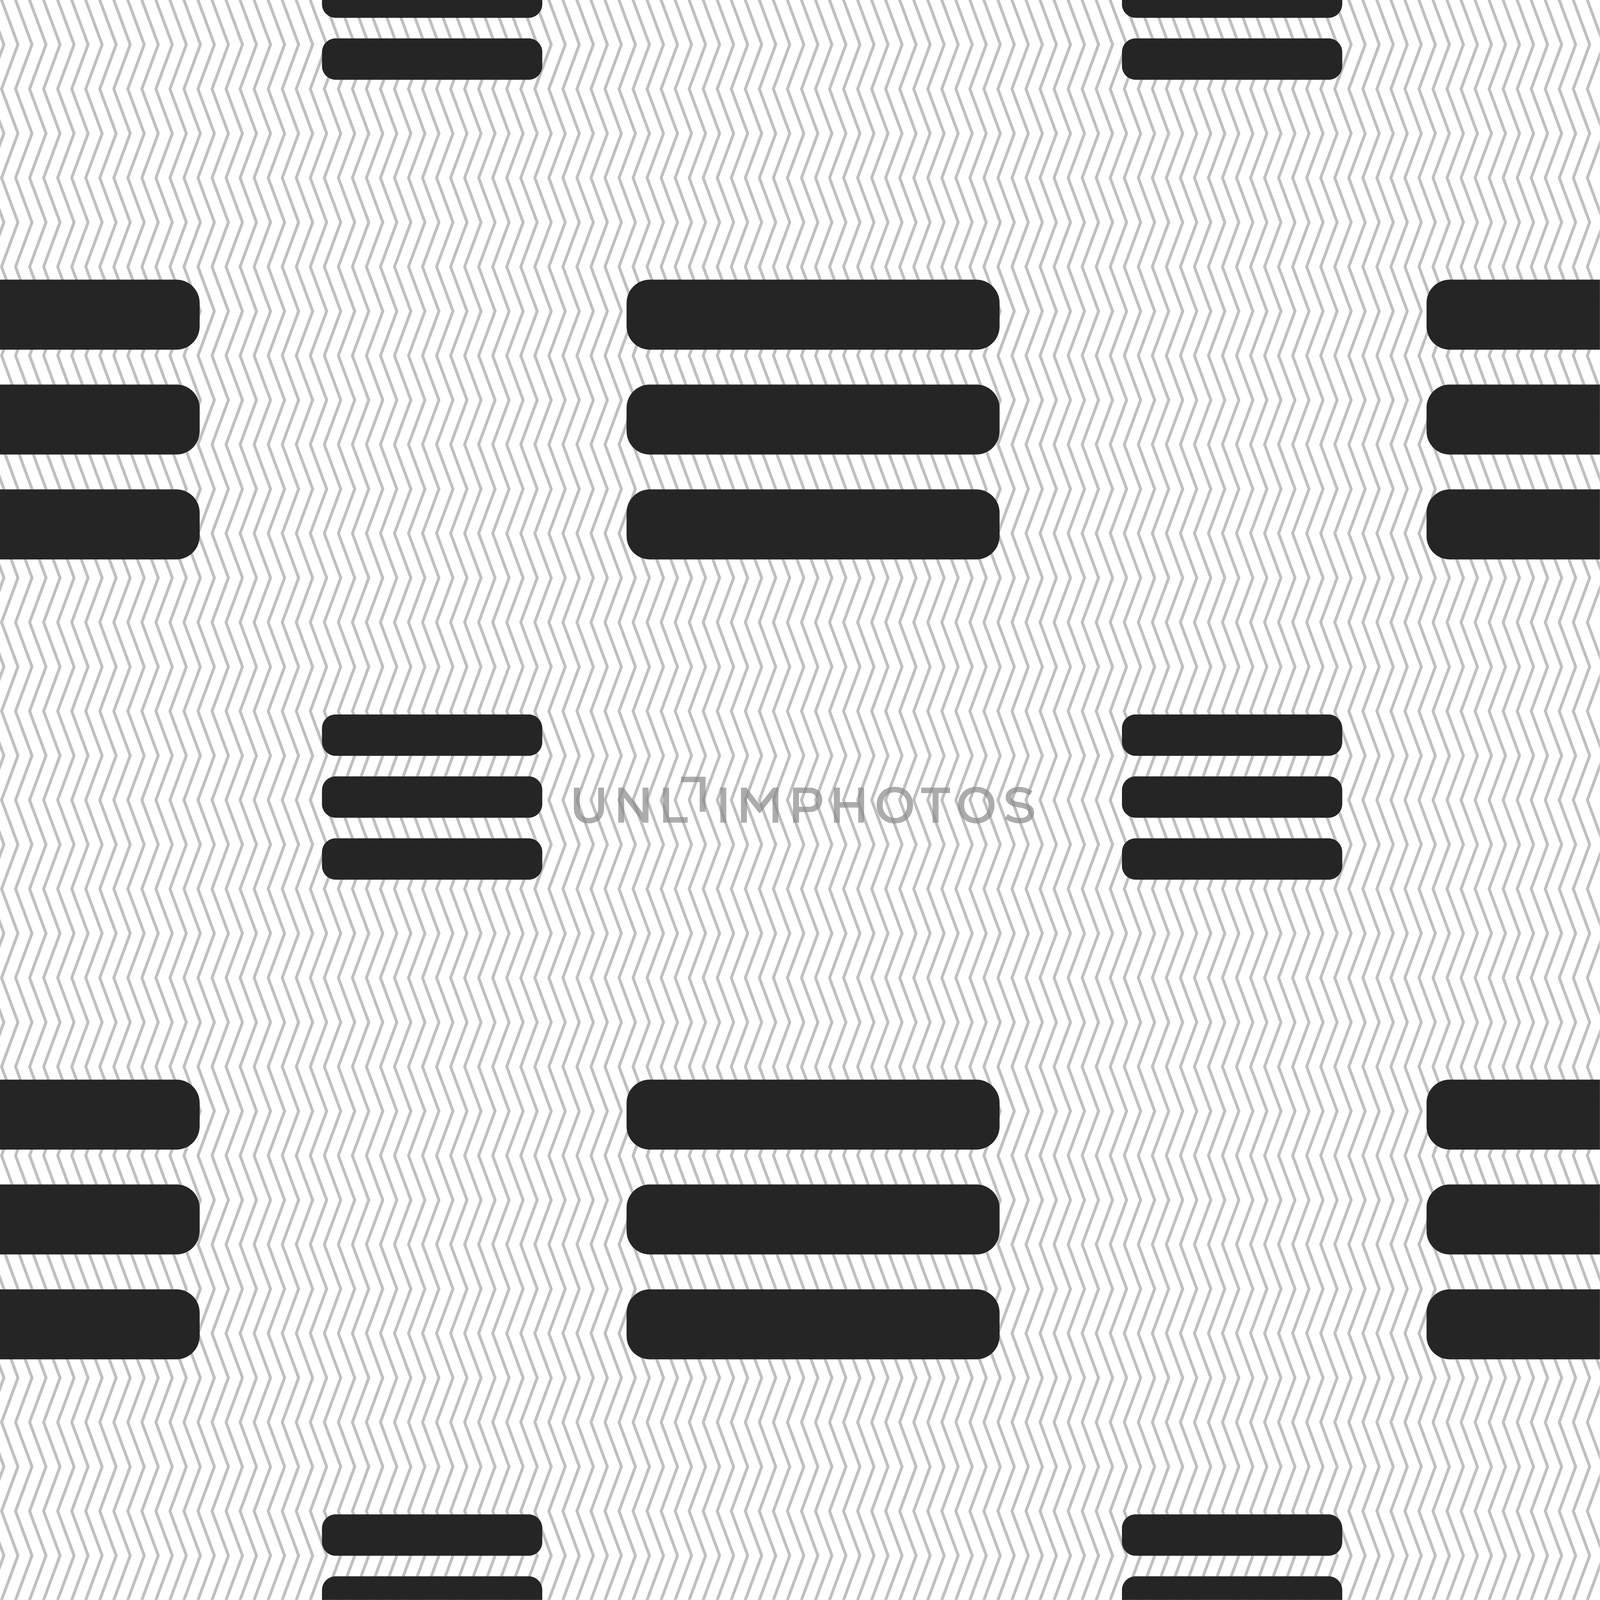 List menu, Content view options icon sign. Seamless pattern with geometric texture. illustration